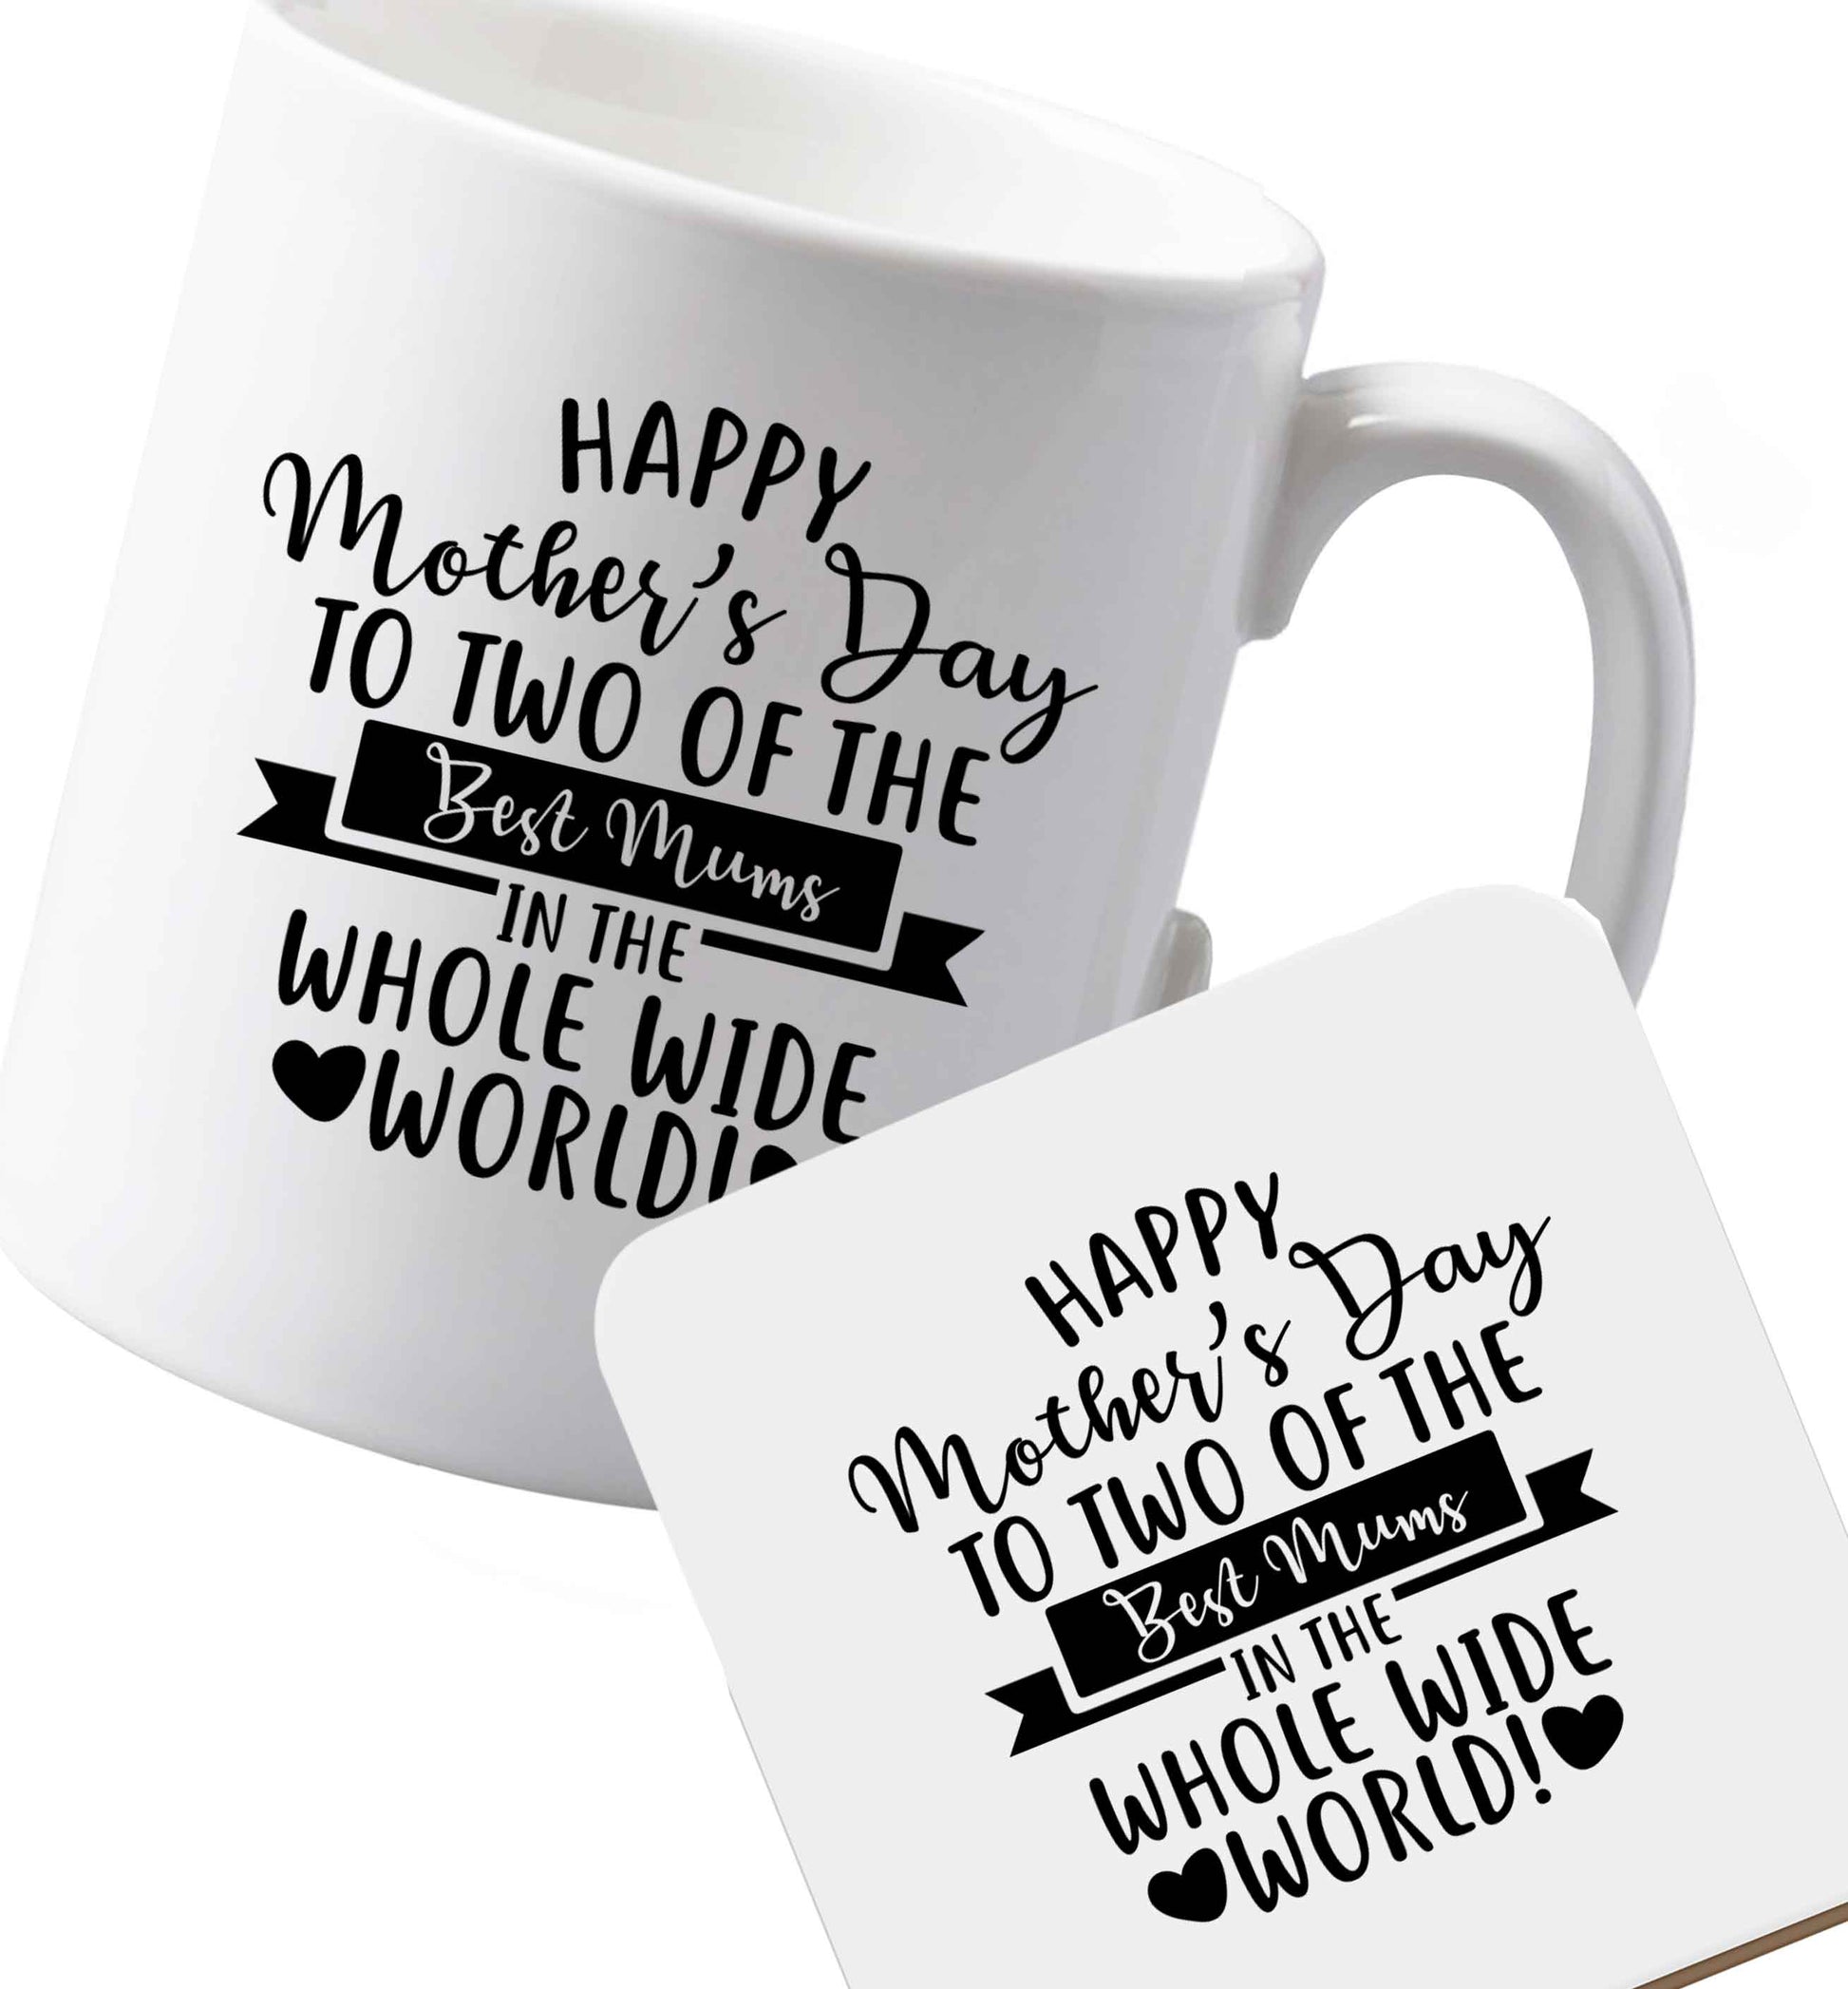 10 oz Ceramic mug and coaster Happy mother's day to two of the best mums in the whole wide world both sides